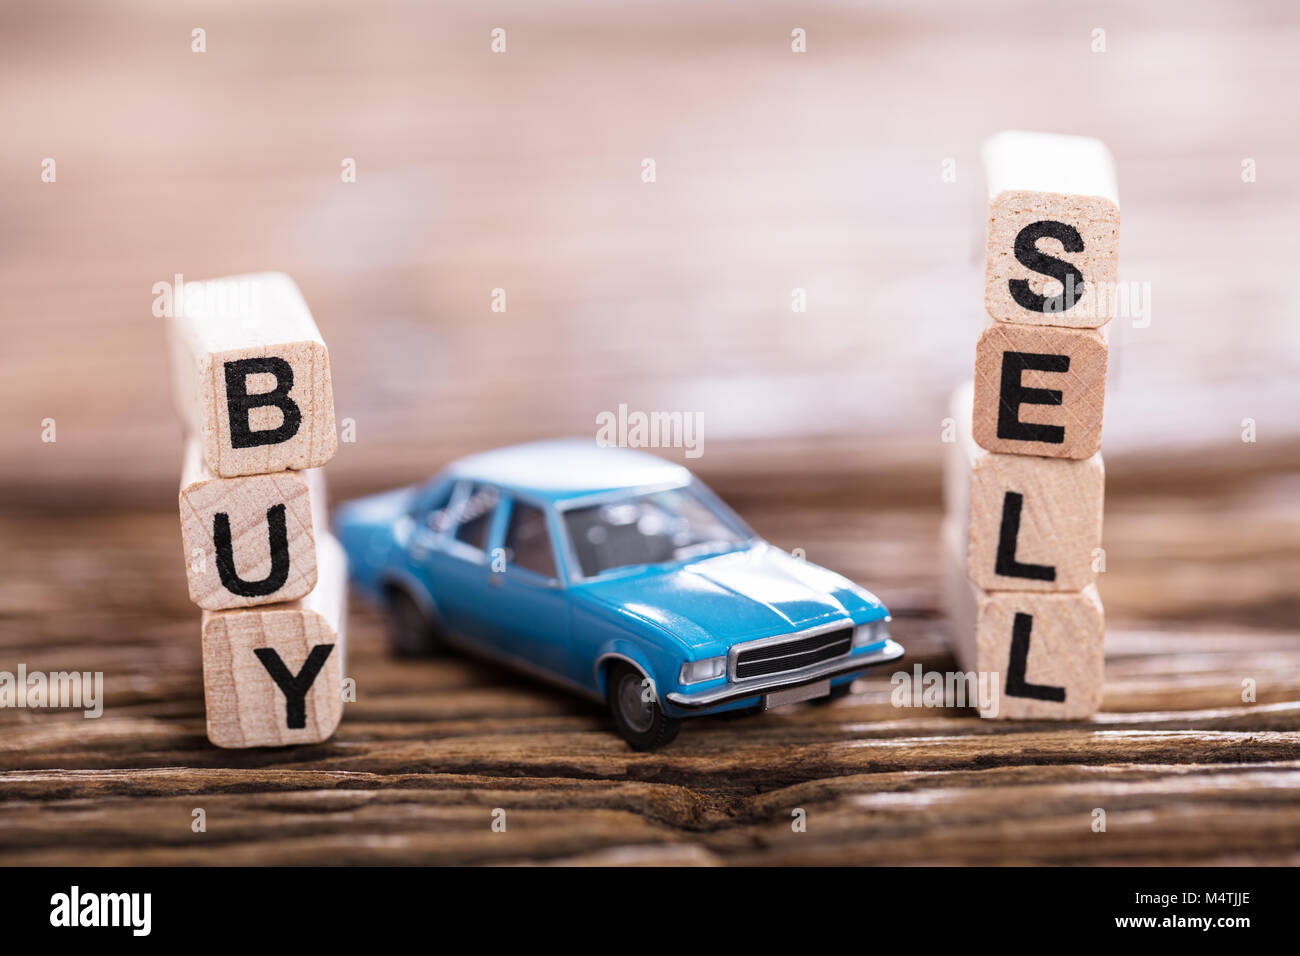 Close-up Of Buy Or Sell Option On Wooden Block With Small Blue Car Stock Photo